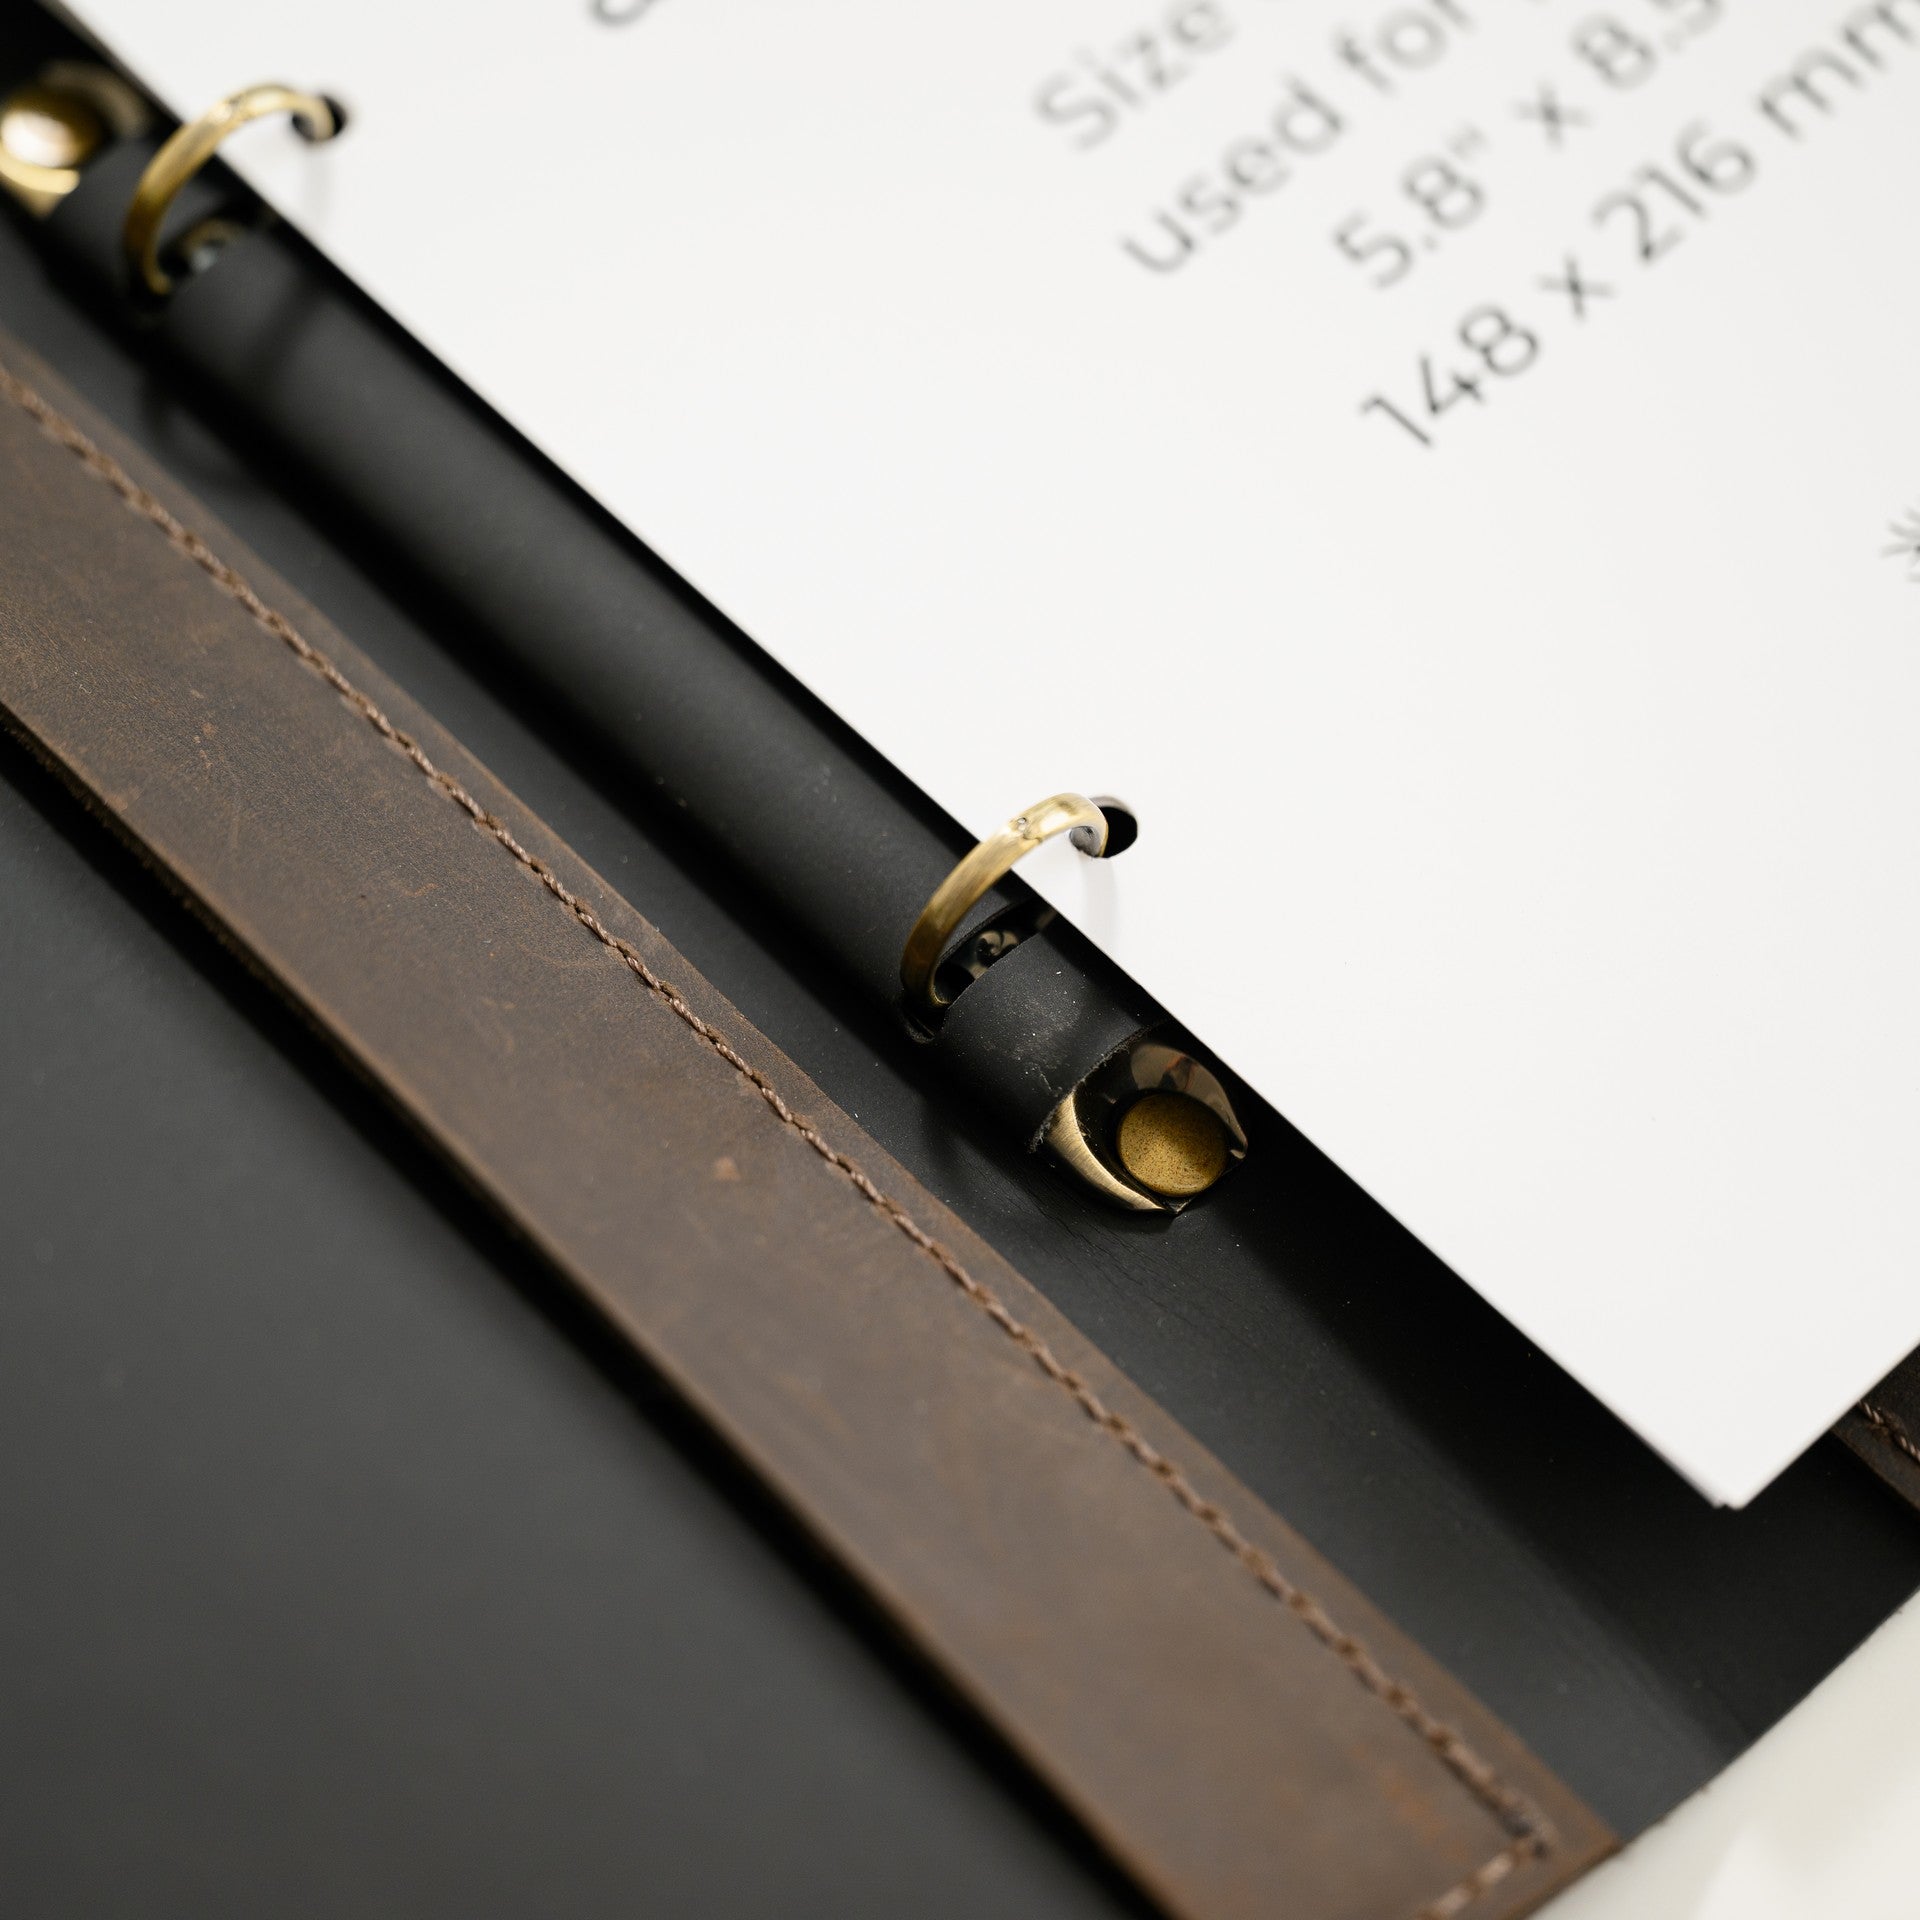 Our leather menu holder with binder offers elegance and functionality in one sleek package.